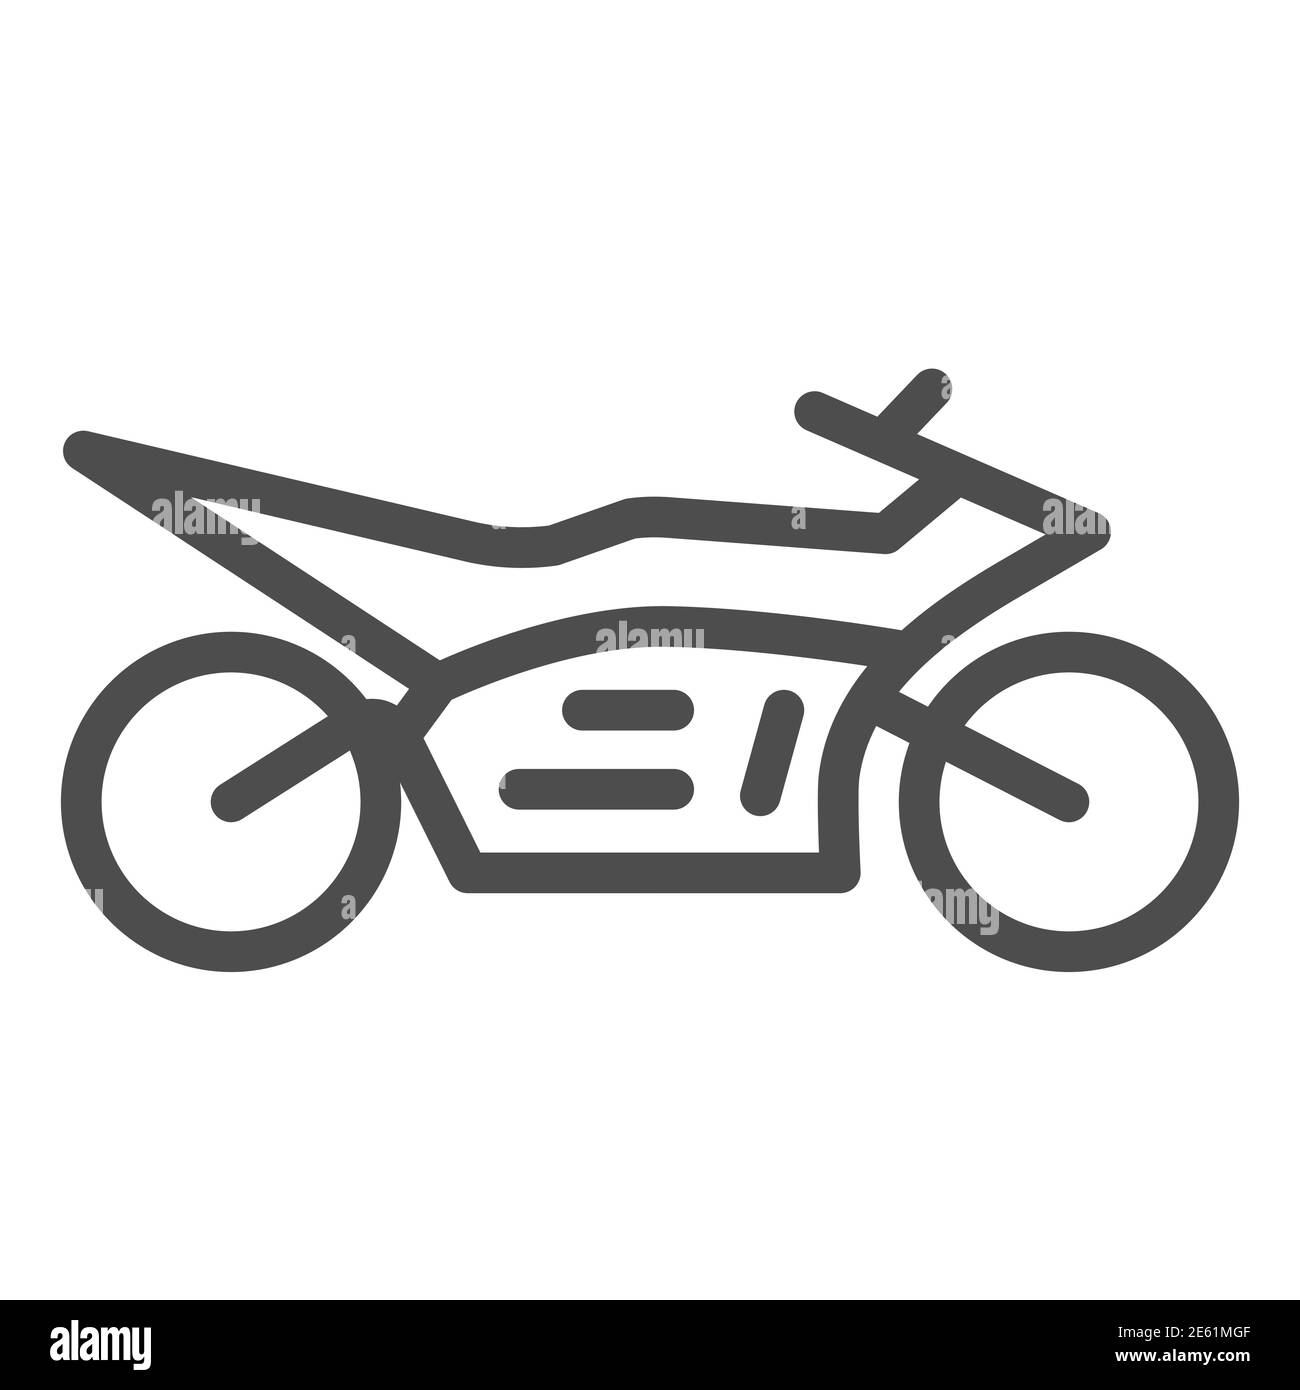 Sportbike line icon, speed road transport symbol, motocross motorbike vector sign on white background, sport motorcycle icon outline style for mobile Stock Vector